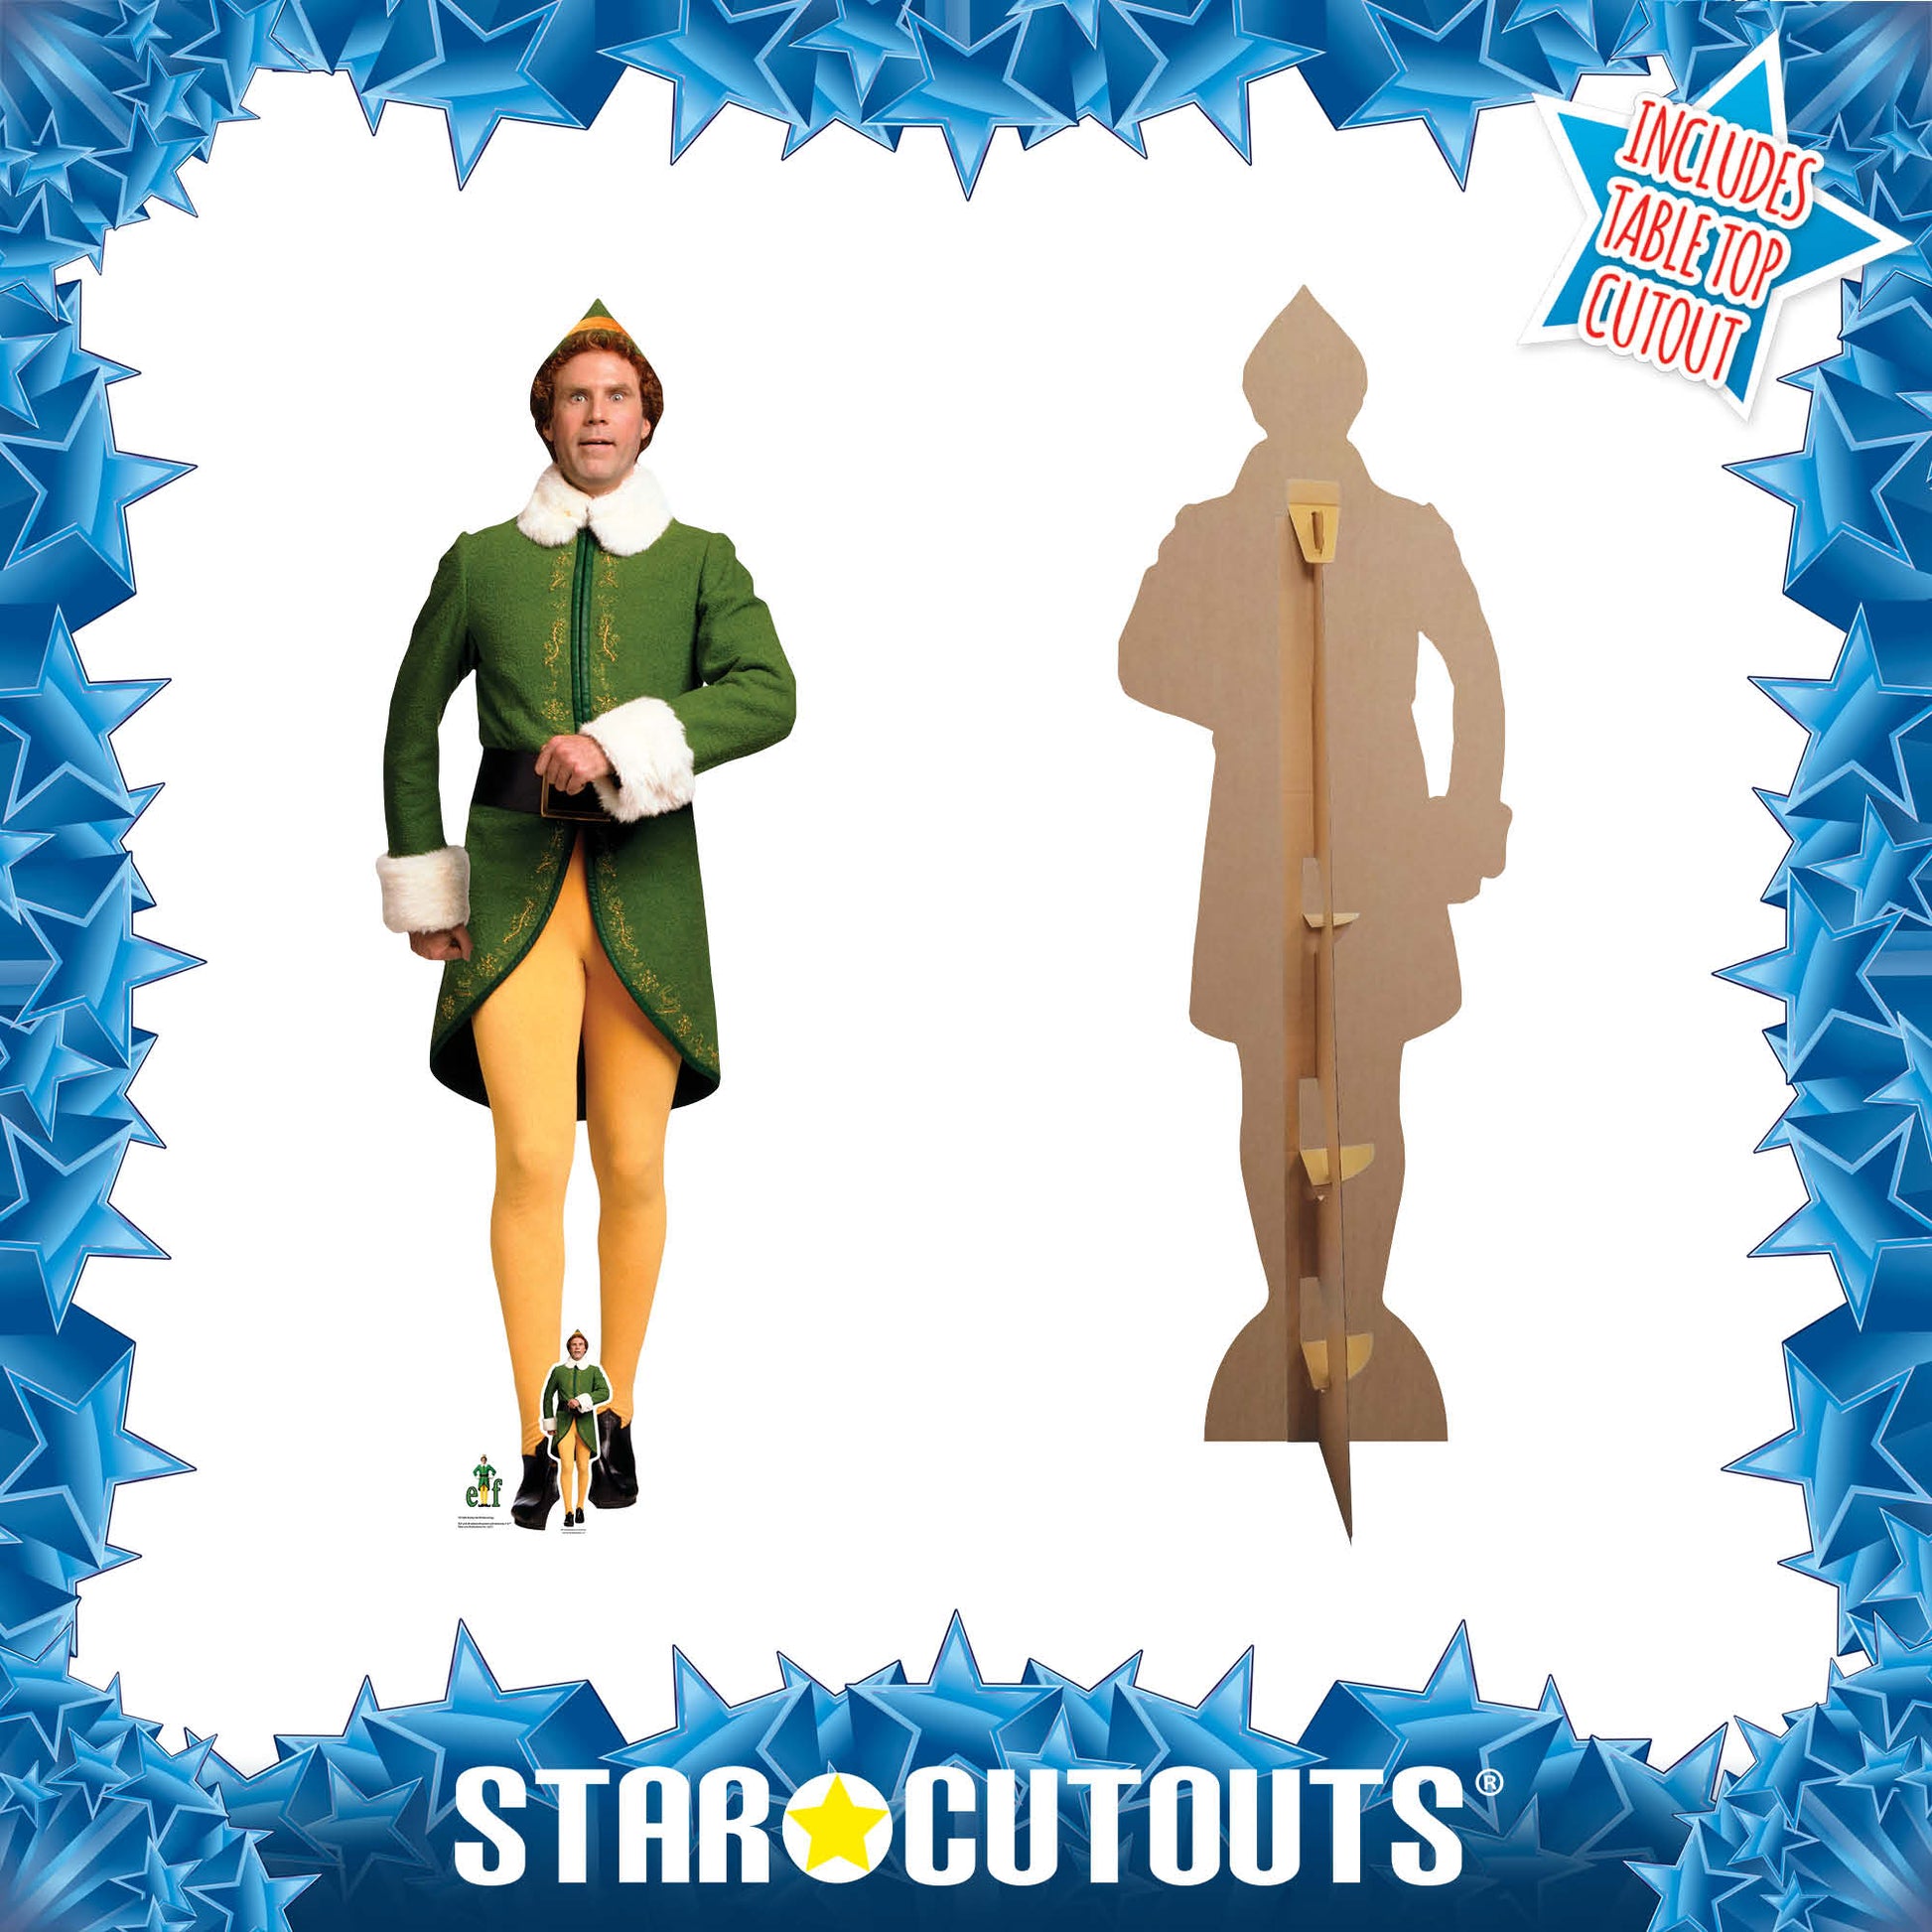 SC1688 Buddy the Elf Marching Cardboard Cut Out Height 188cm – Star Cutouts